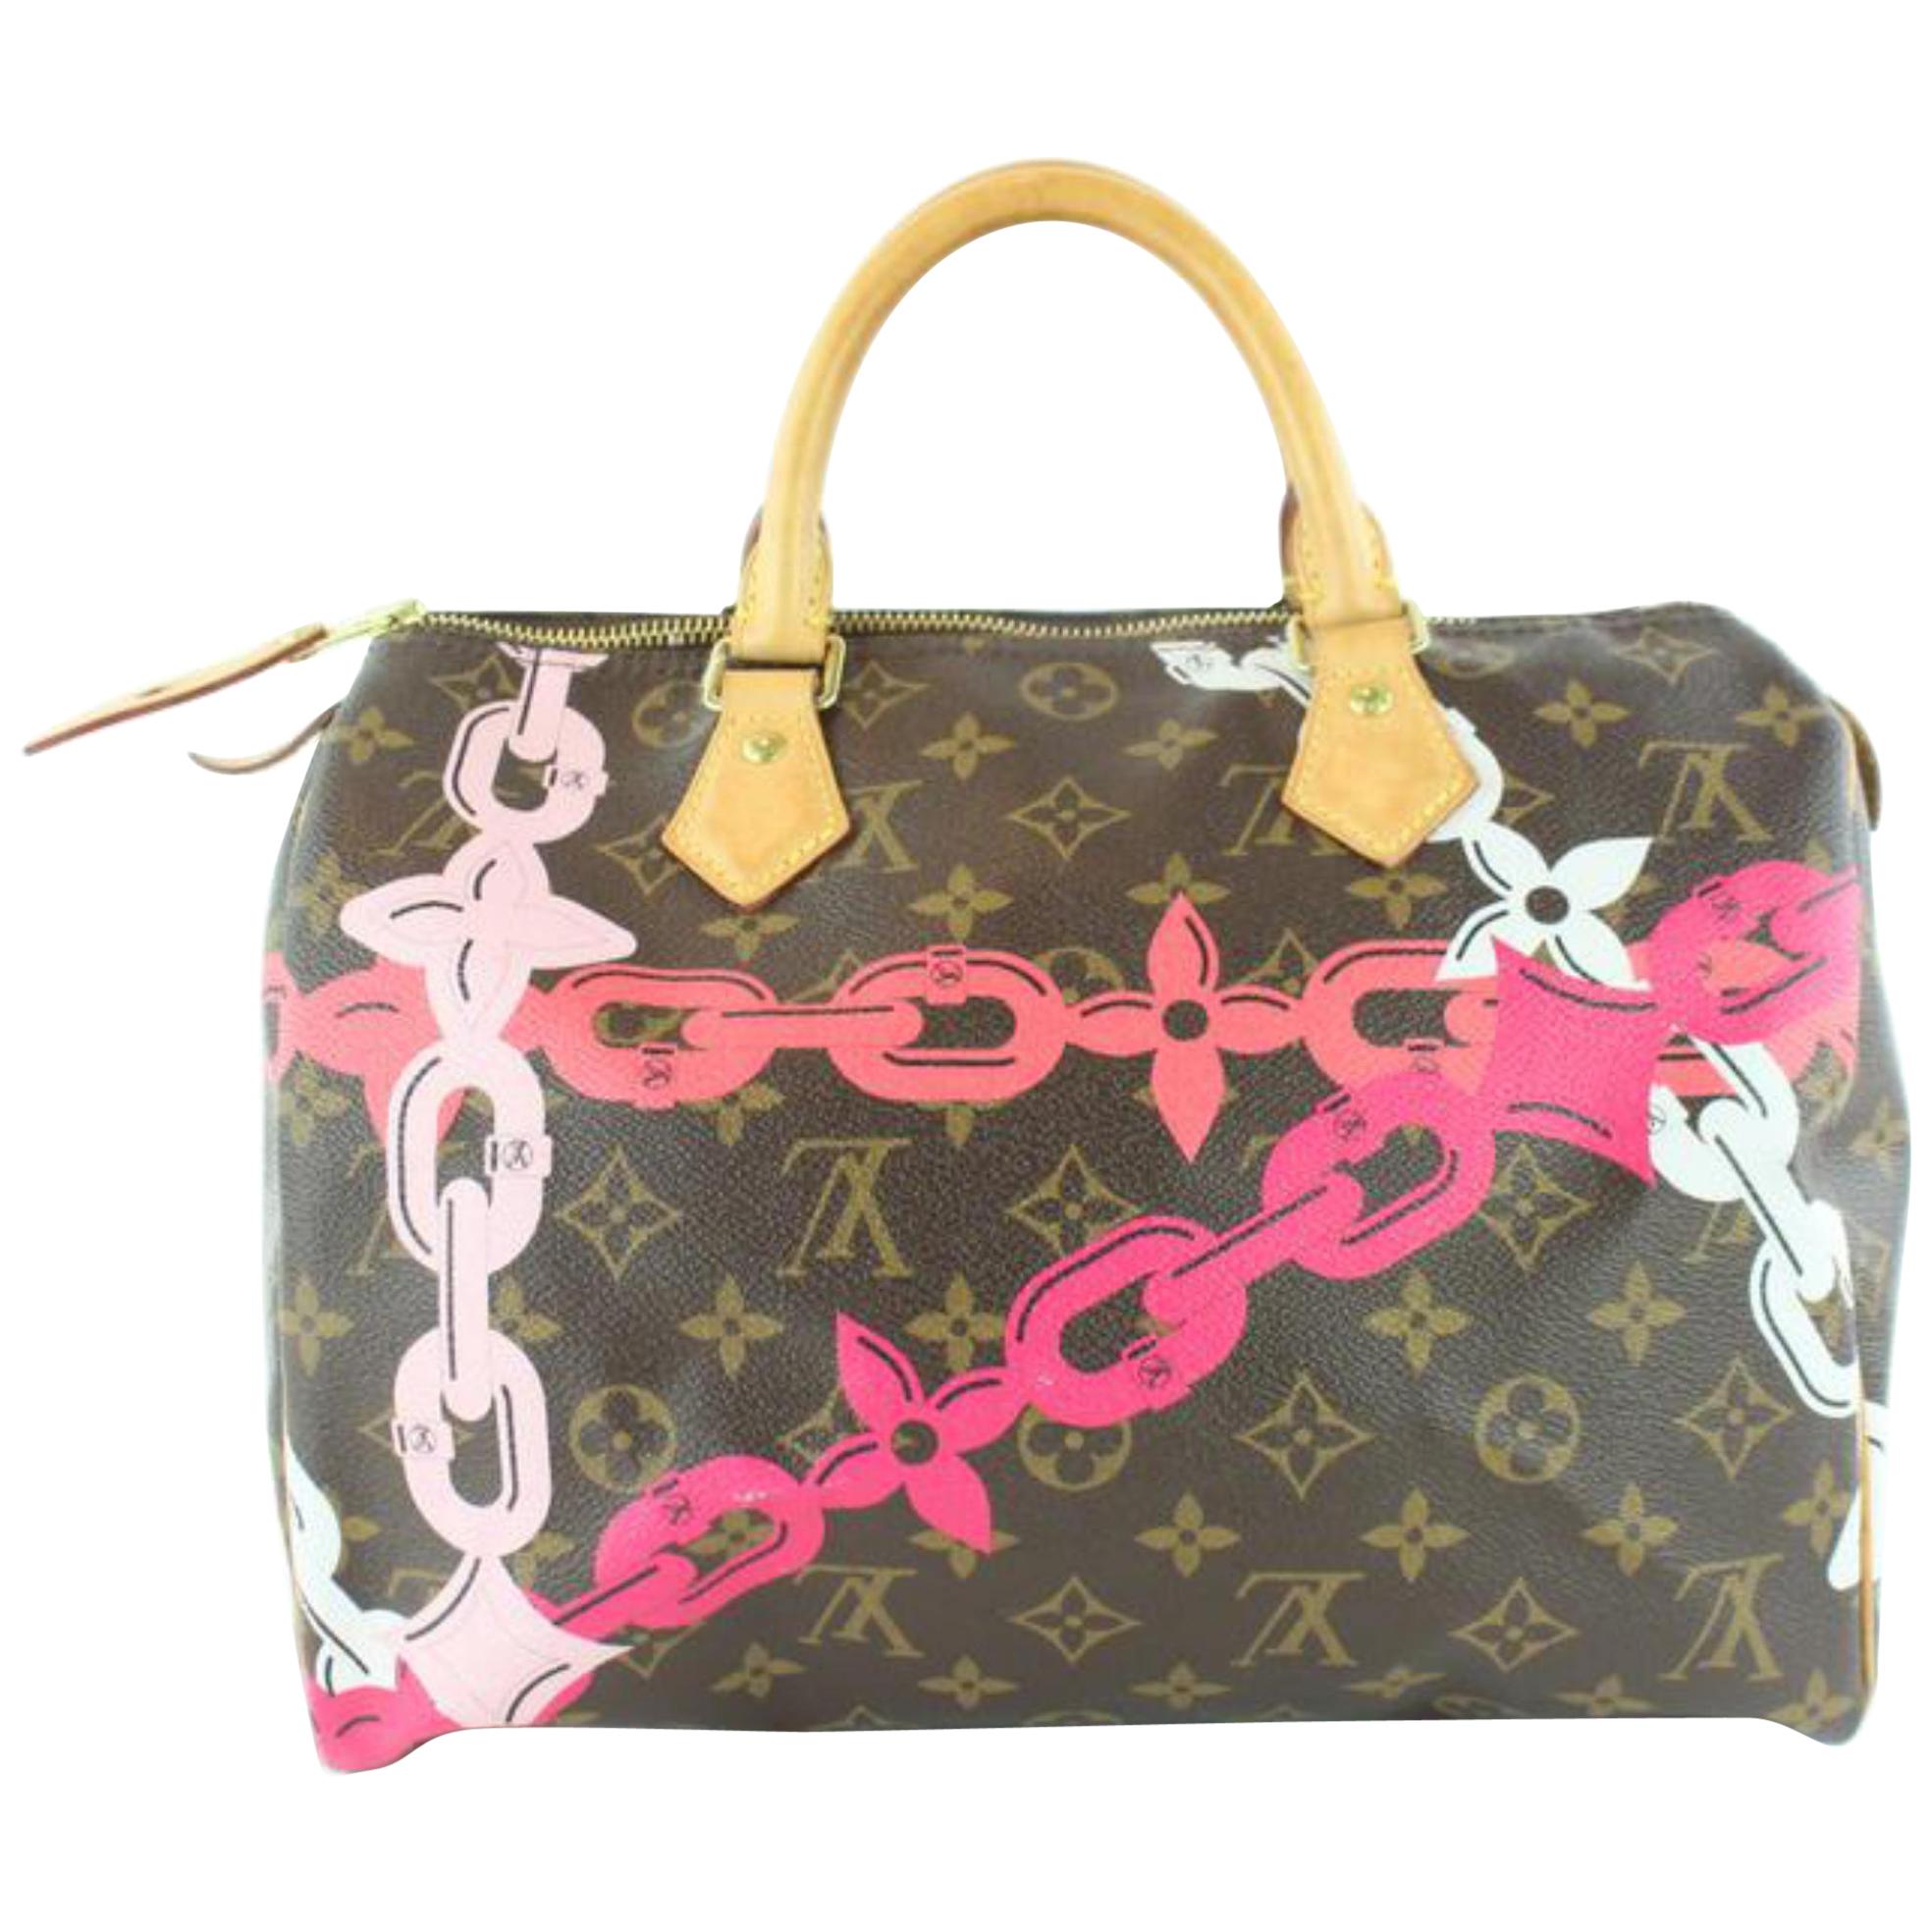 NEW RELEASE: CANDY BOX chain perfect for Louis Vuitton bags